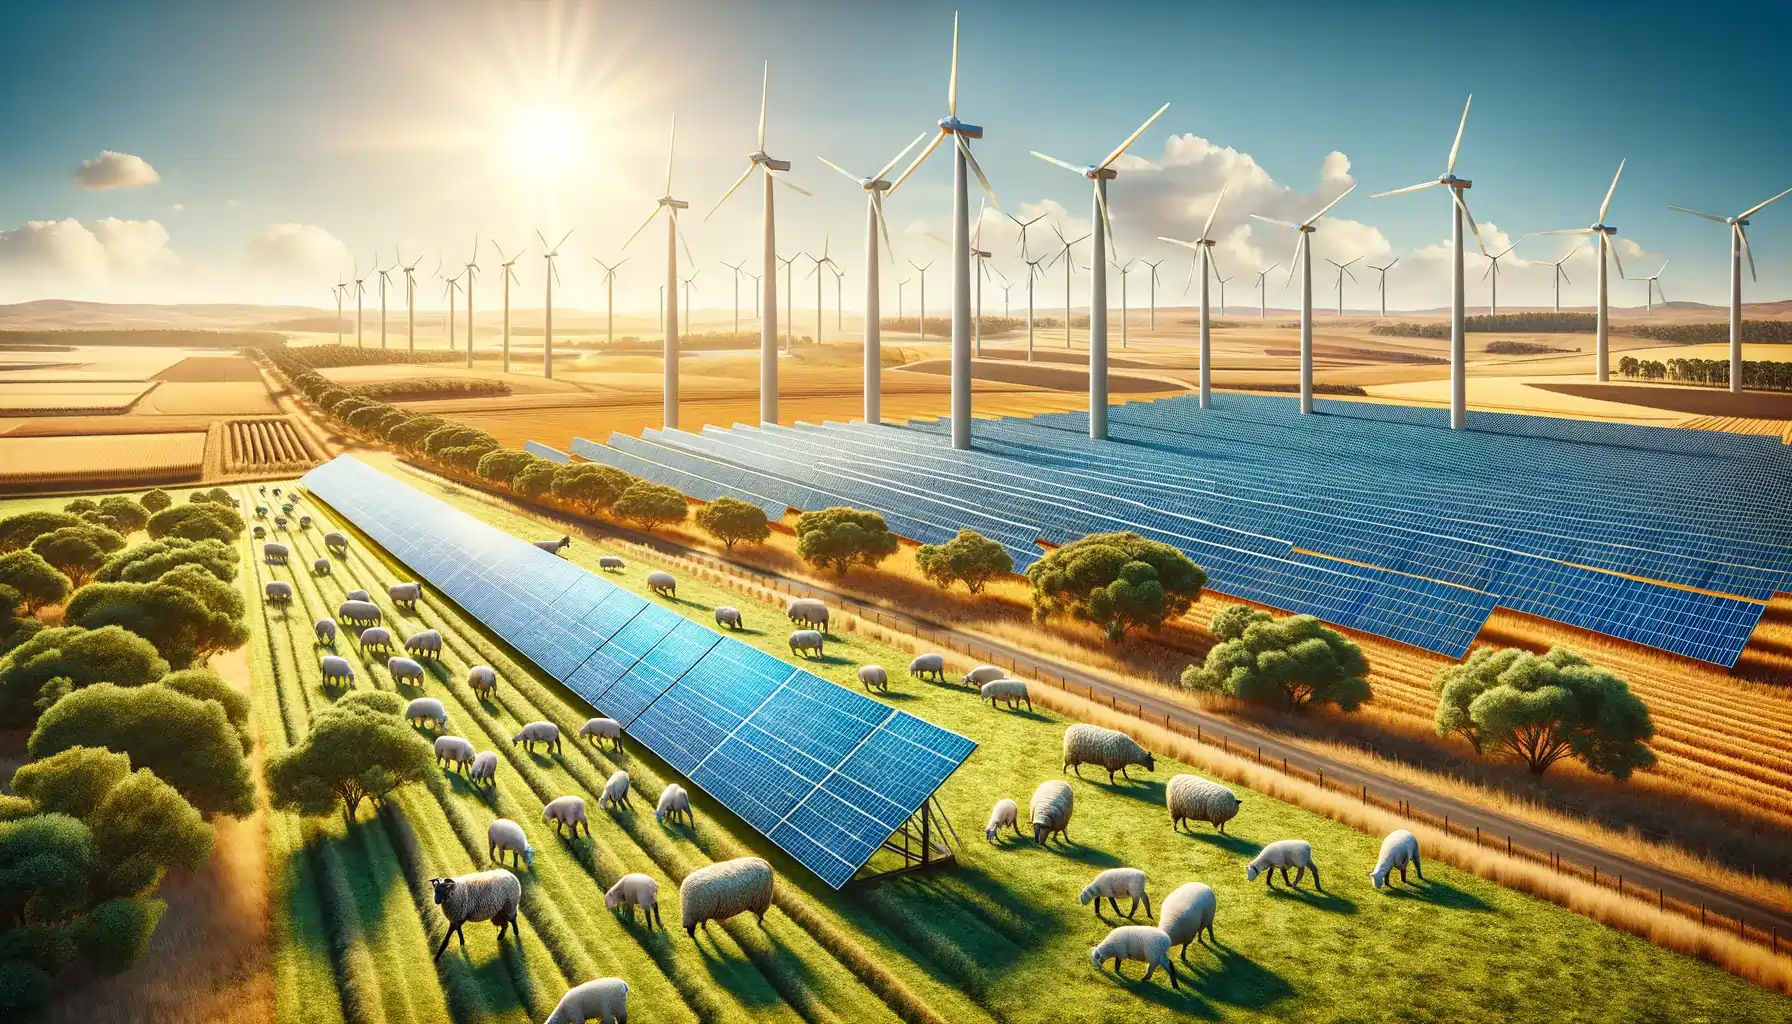 Australia's Path to Renewable Energy with Minimal Agricultural Impact